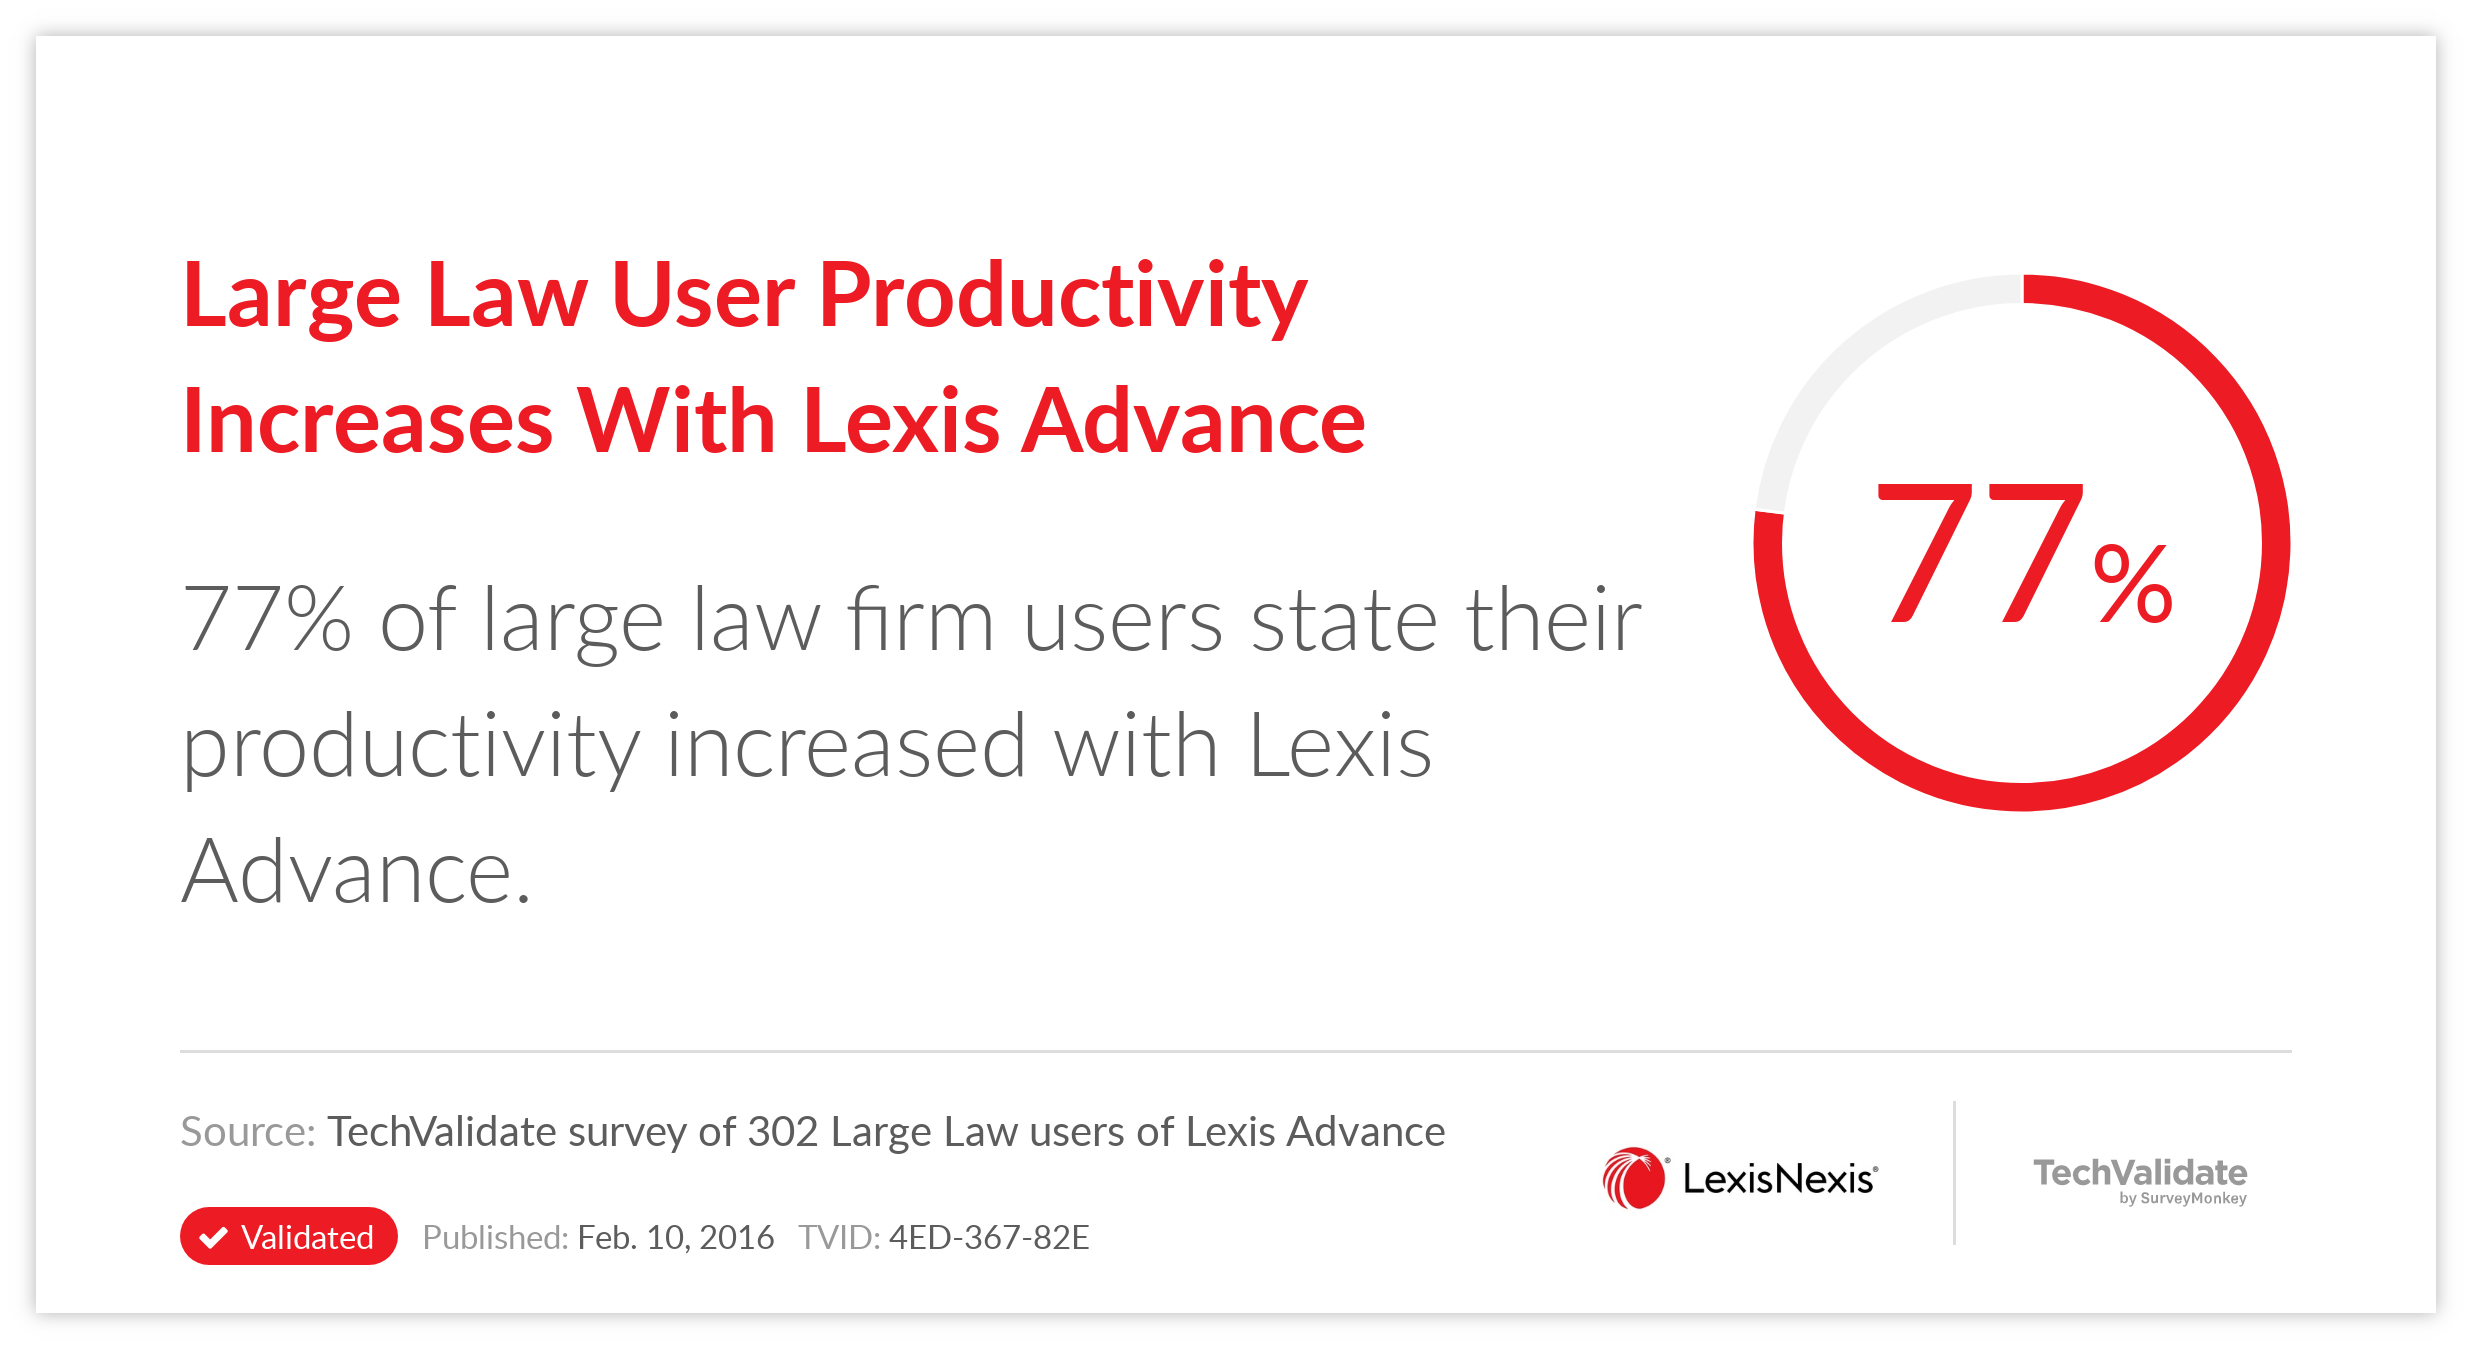 Large Law User Productivity Increases With Lexis Advance